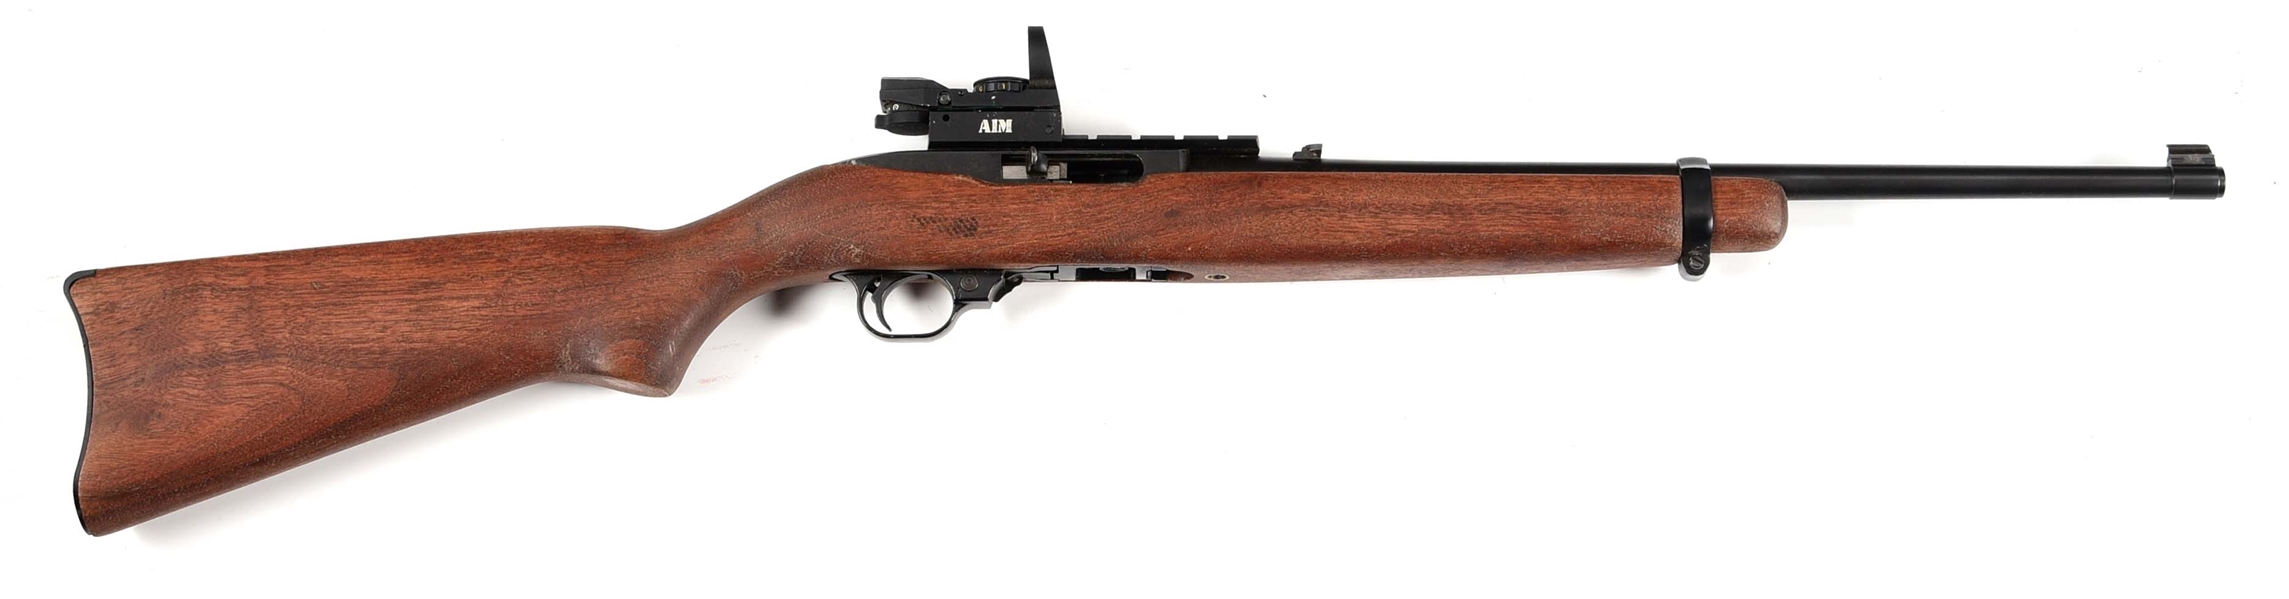 (M) RUGER MODEL 10/22 SEMI-AUTOMATIC RIFLE.